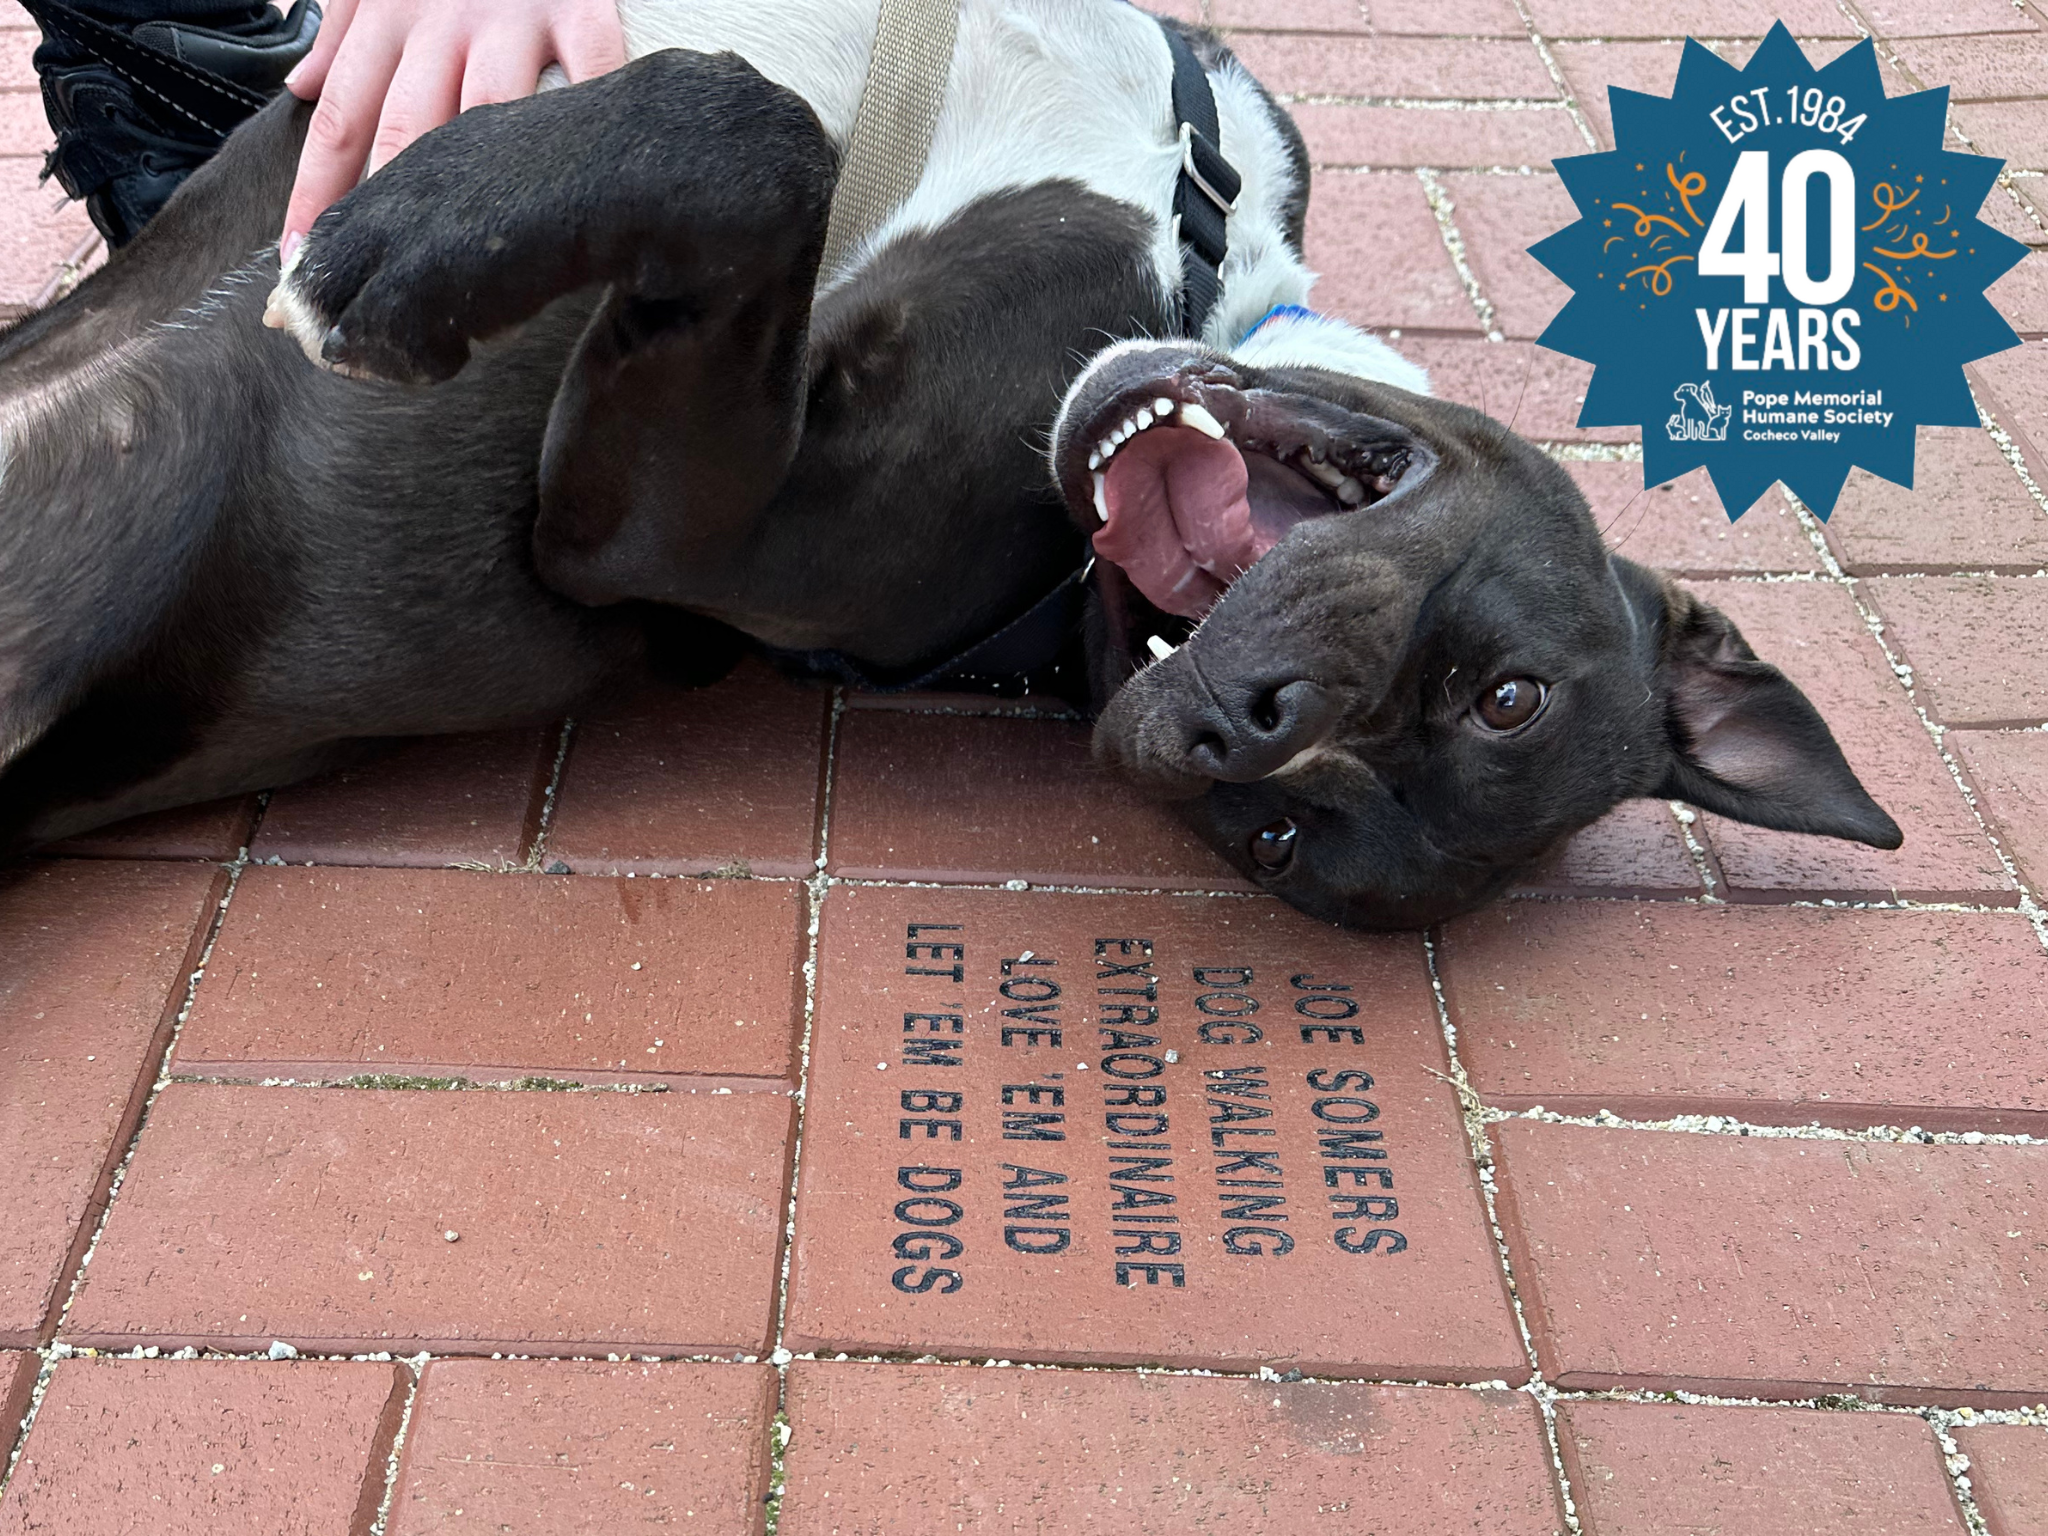 Titan, a black mixed breed dog, smiling and showing off one of our current PMHS-CV bricks. Our 40th logo stamp is in the top right corner of the image.